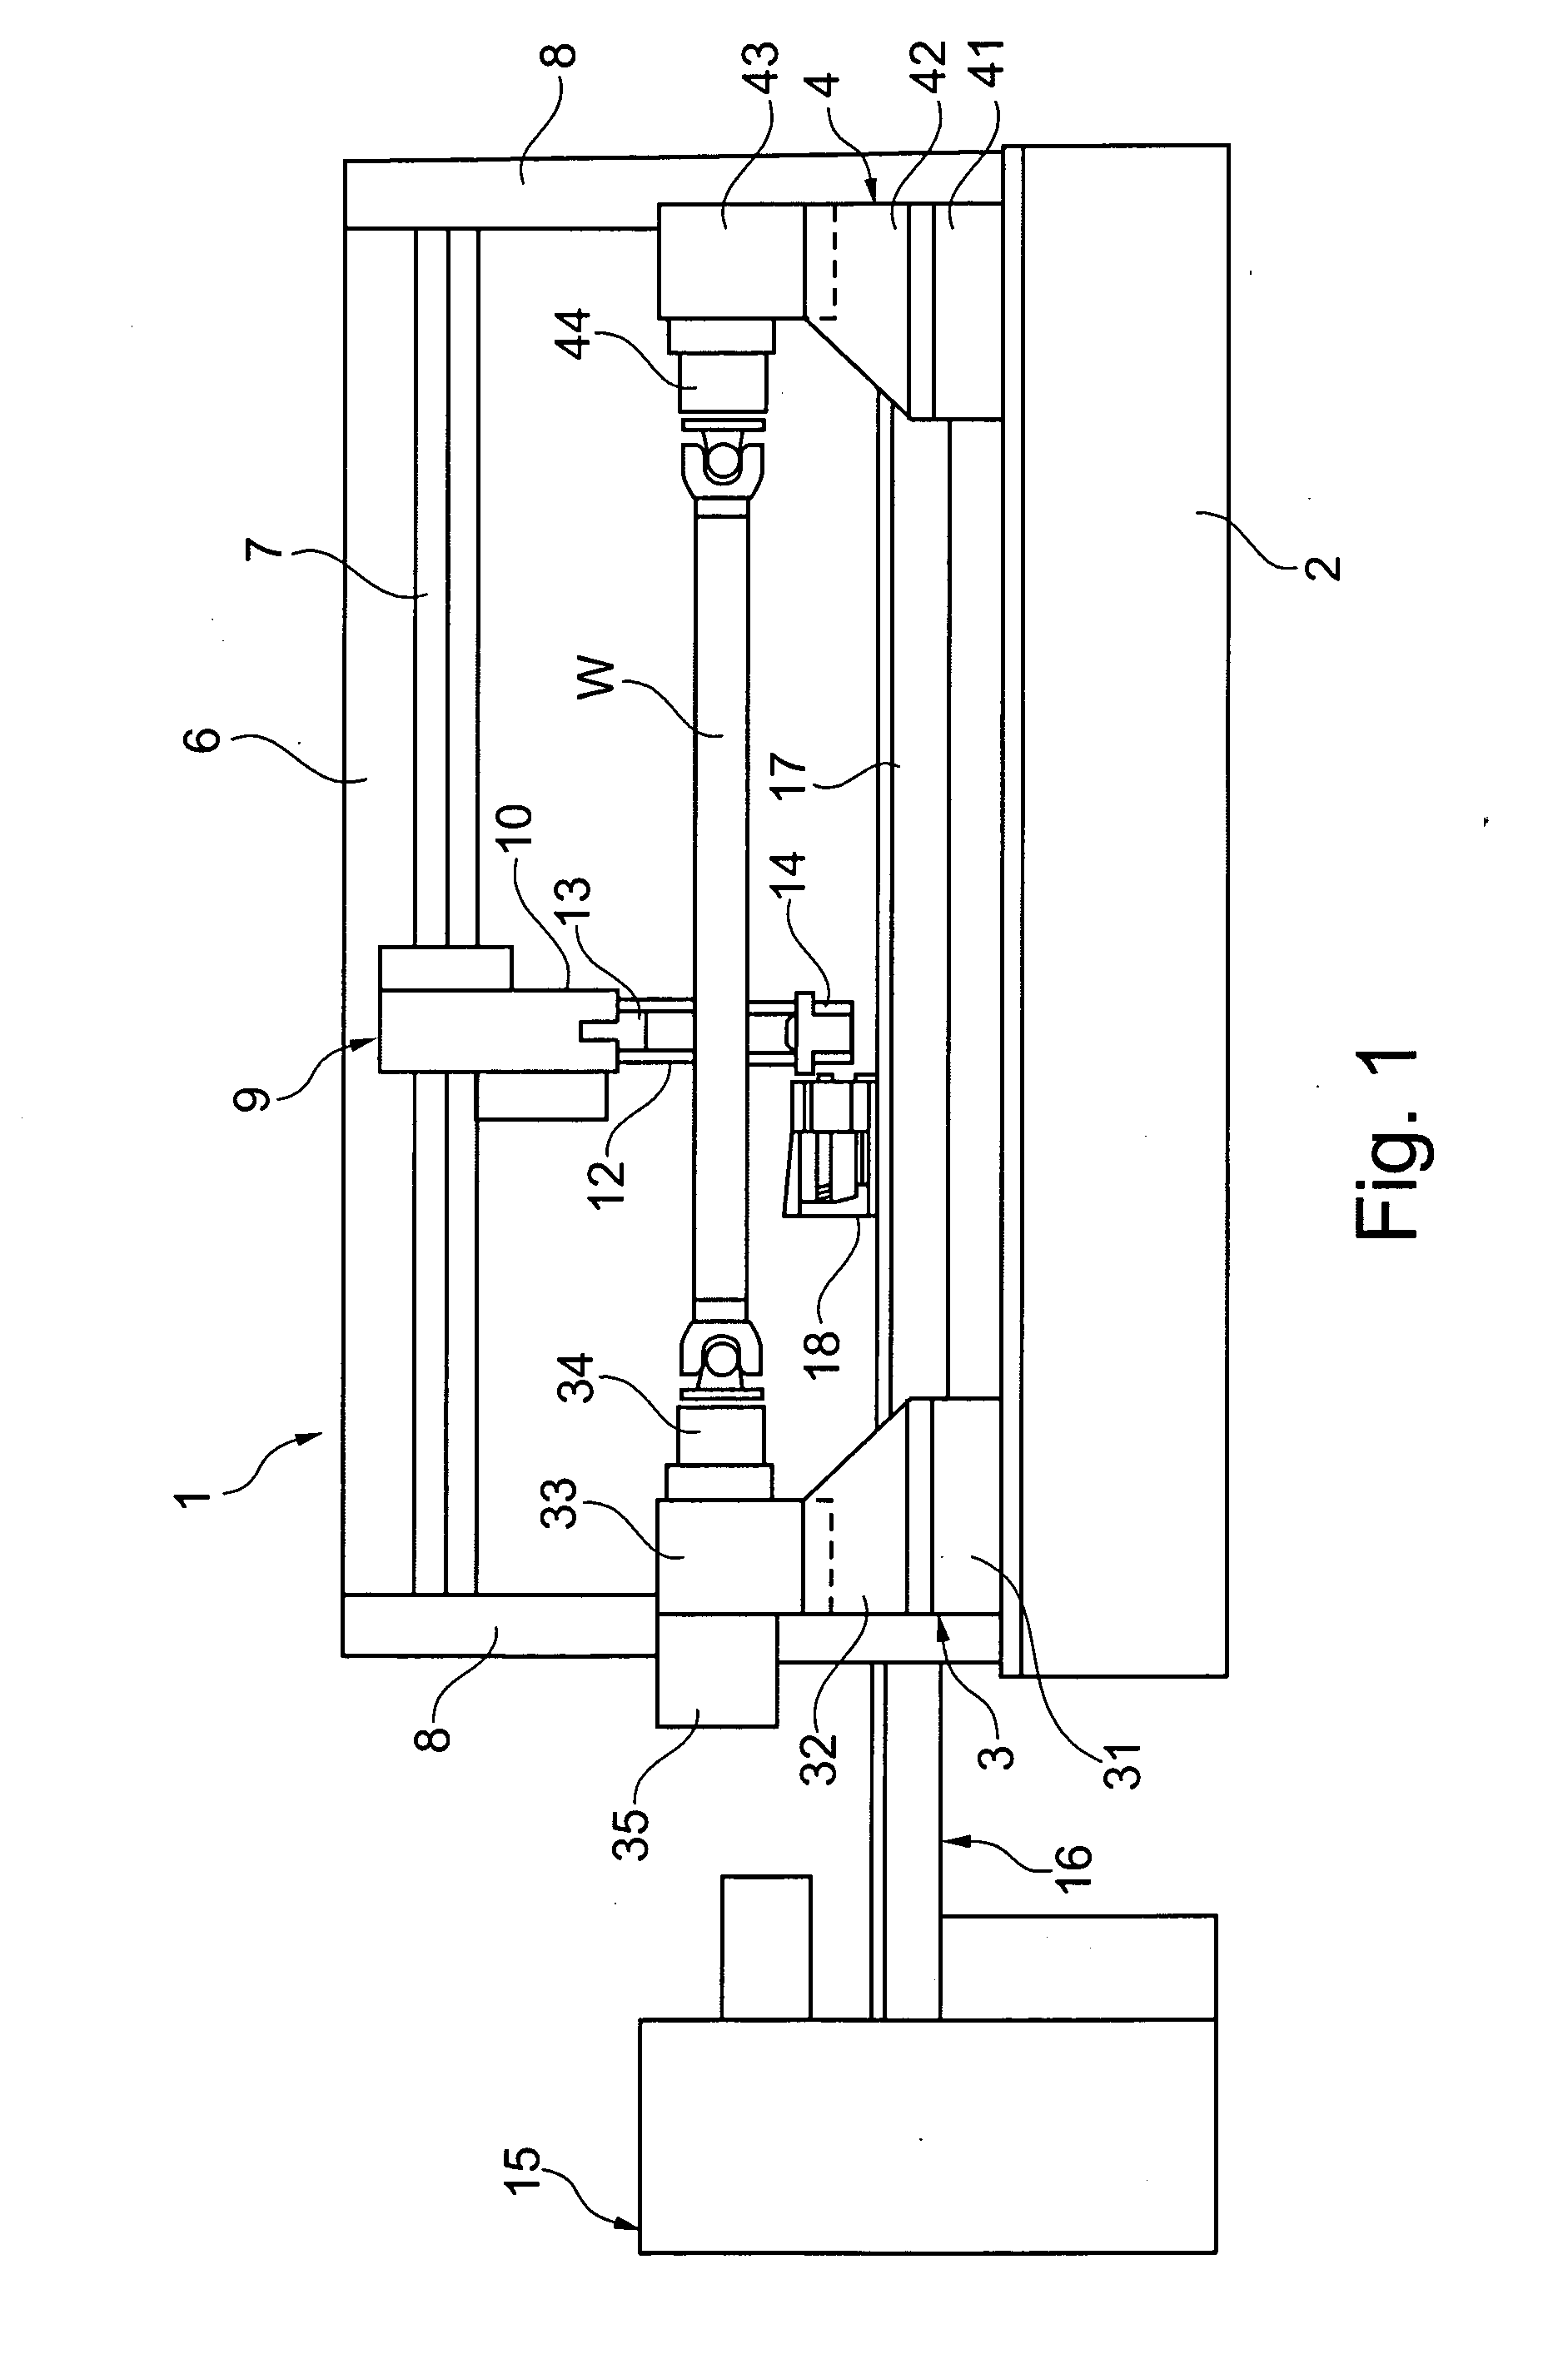 Method and device for feeding and attaching corrective elements for unbalance correction, in particular in a balancing machine